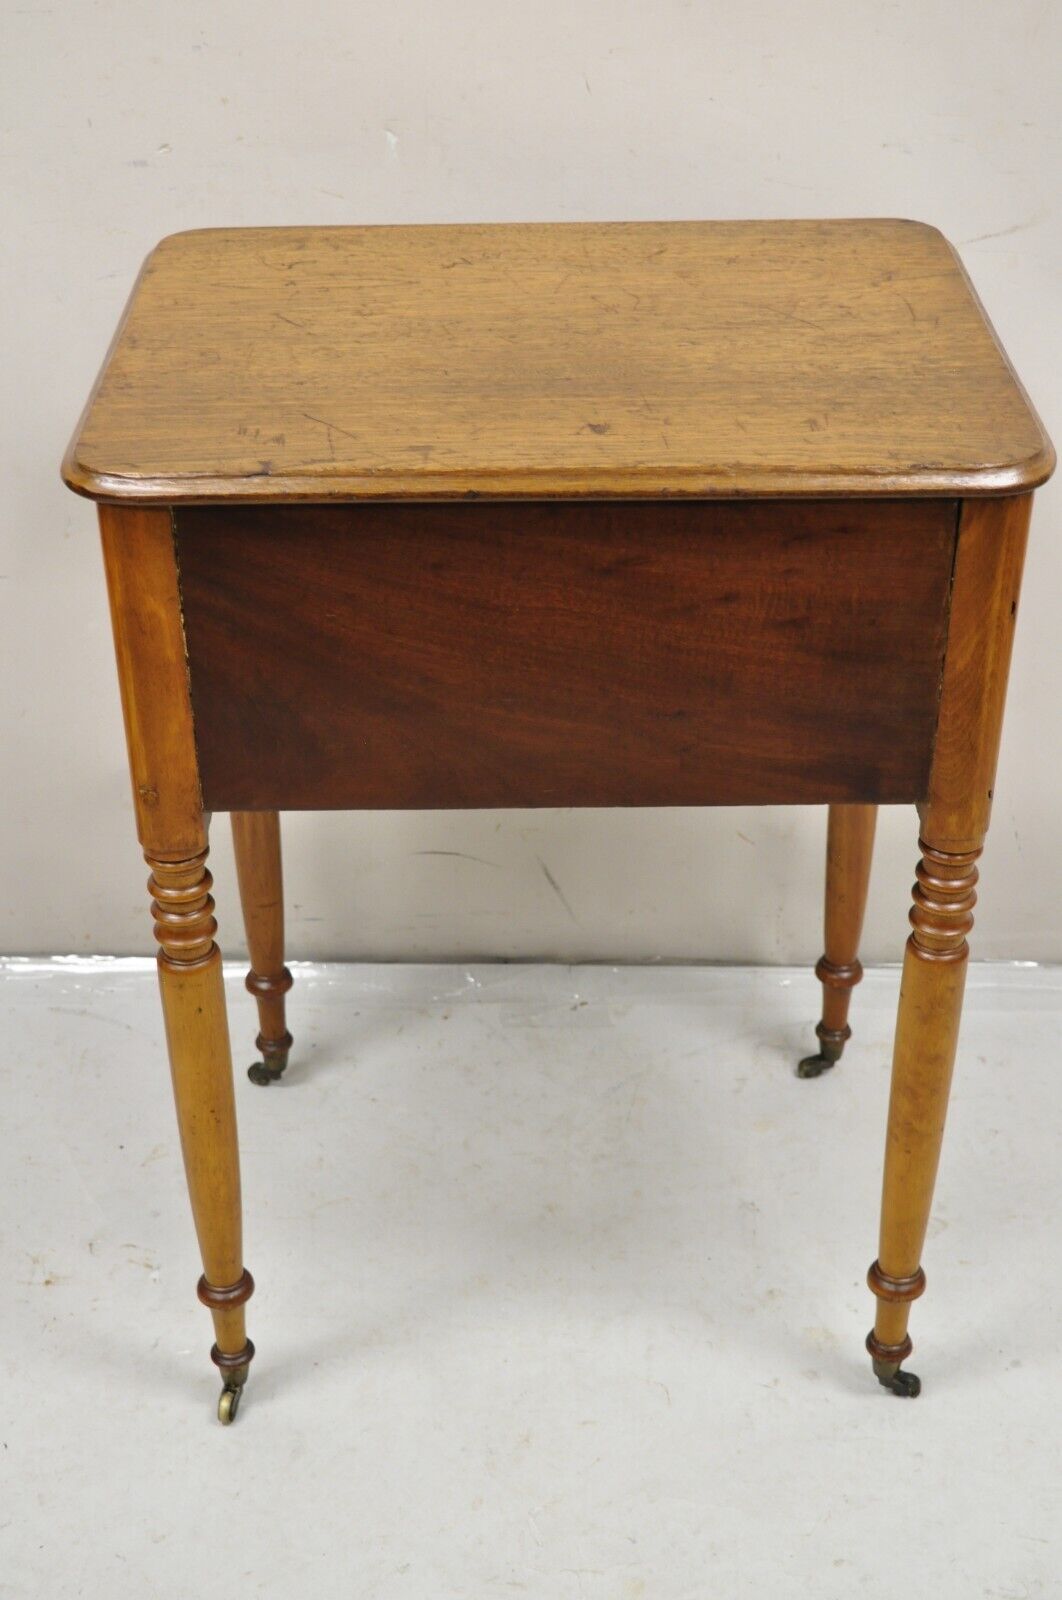 Antique American Colonial Sheraton Mahogany 2 Drawer Nightstand Bedside Table